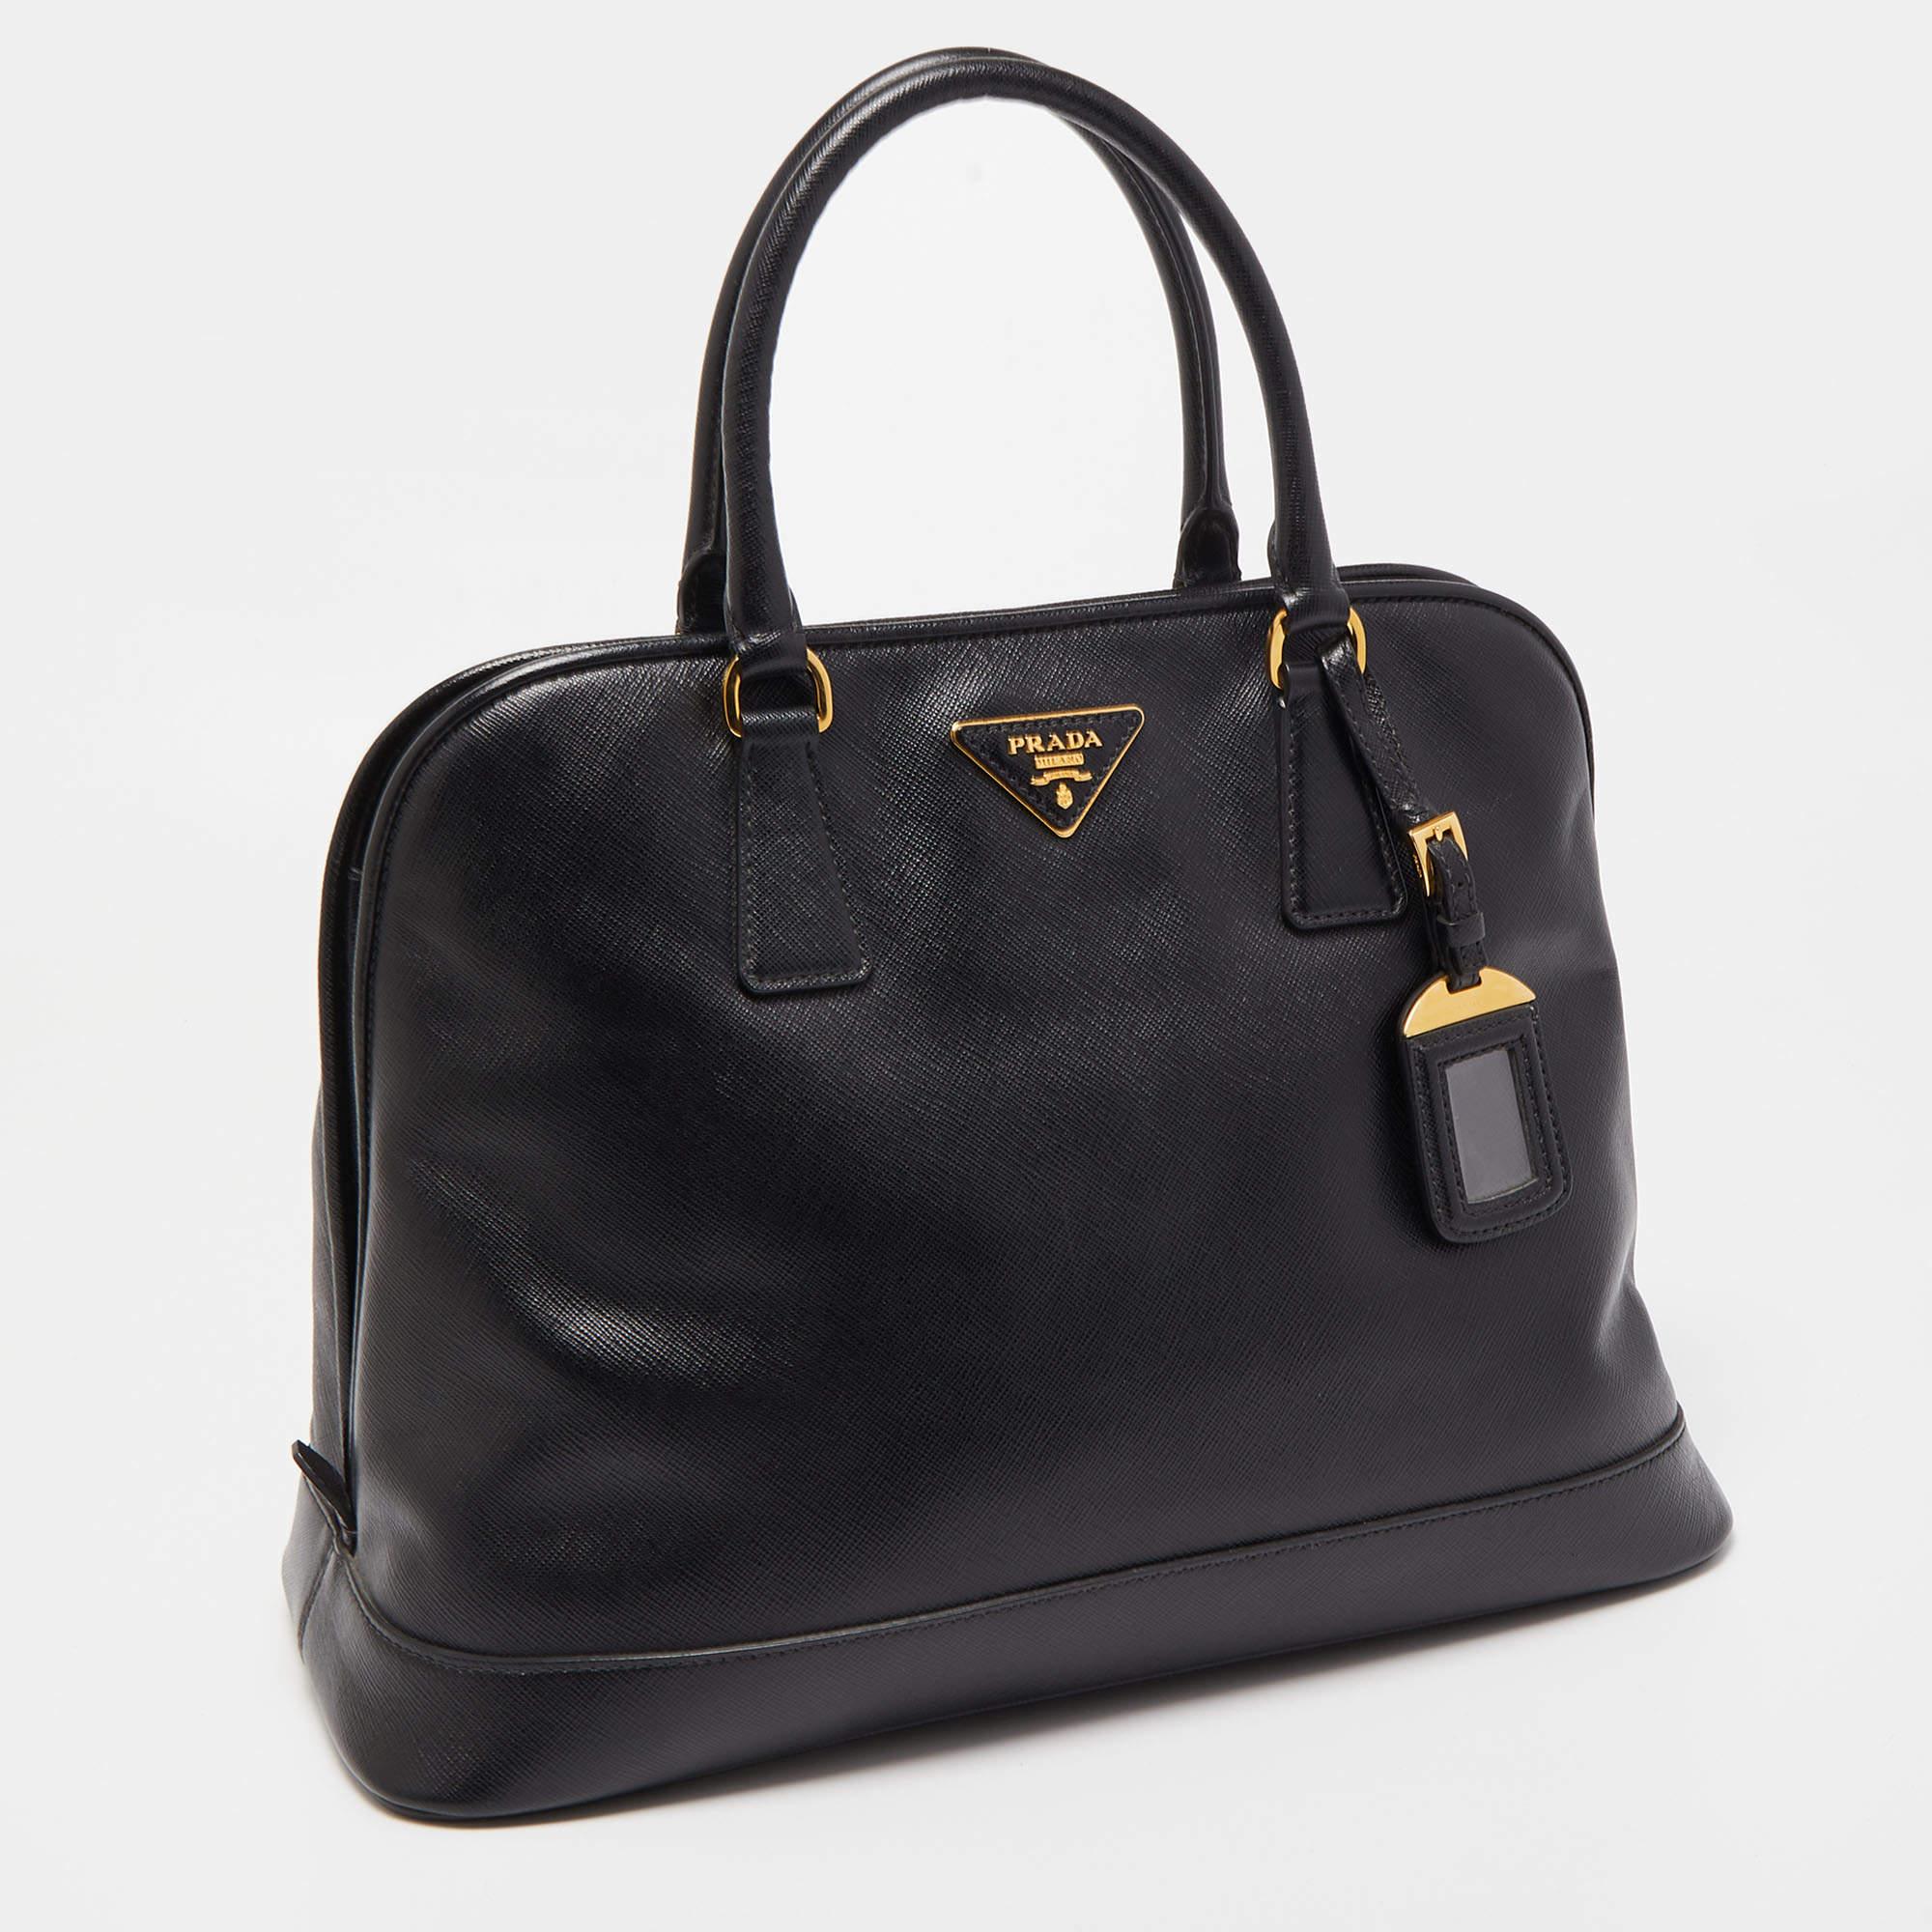 The fashion house’s tradition of excellence, coupled with modern design sensibilities, works to make this Prada black bag one of a kind. It's a fabulous accessory for everyday use.

